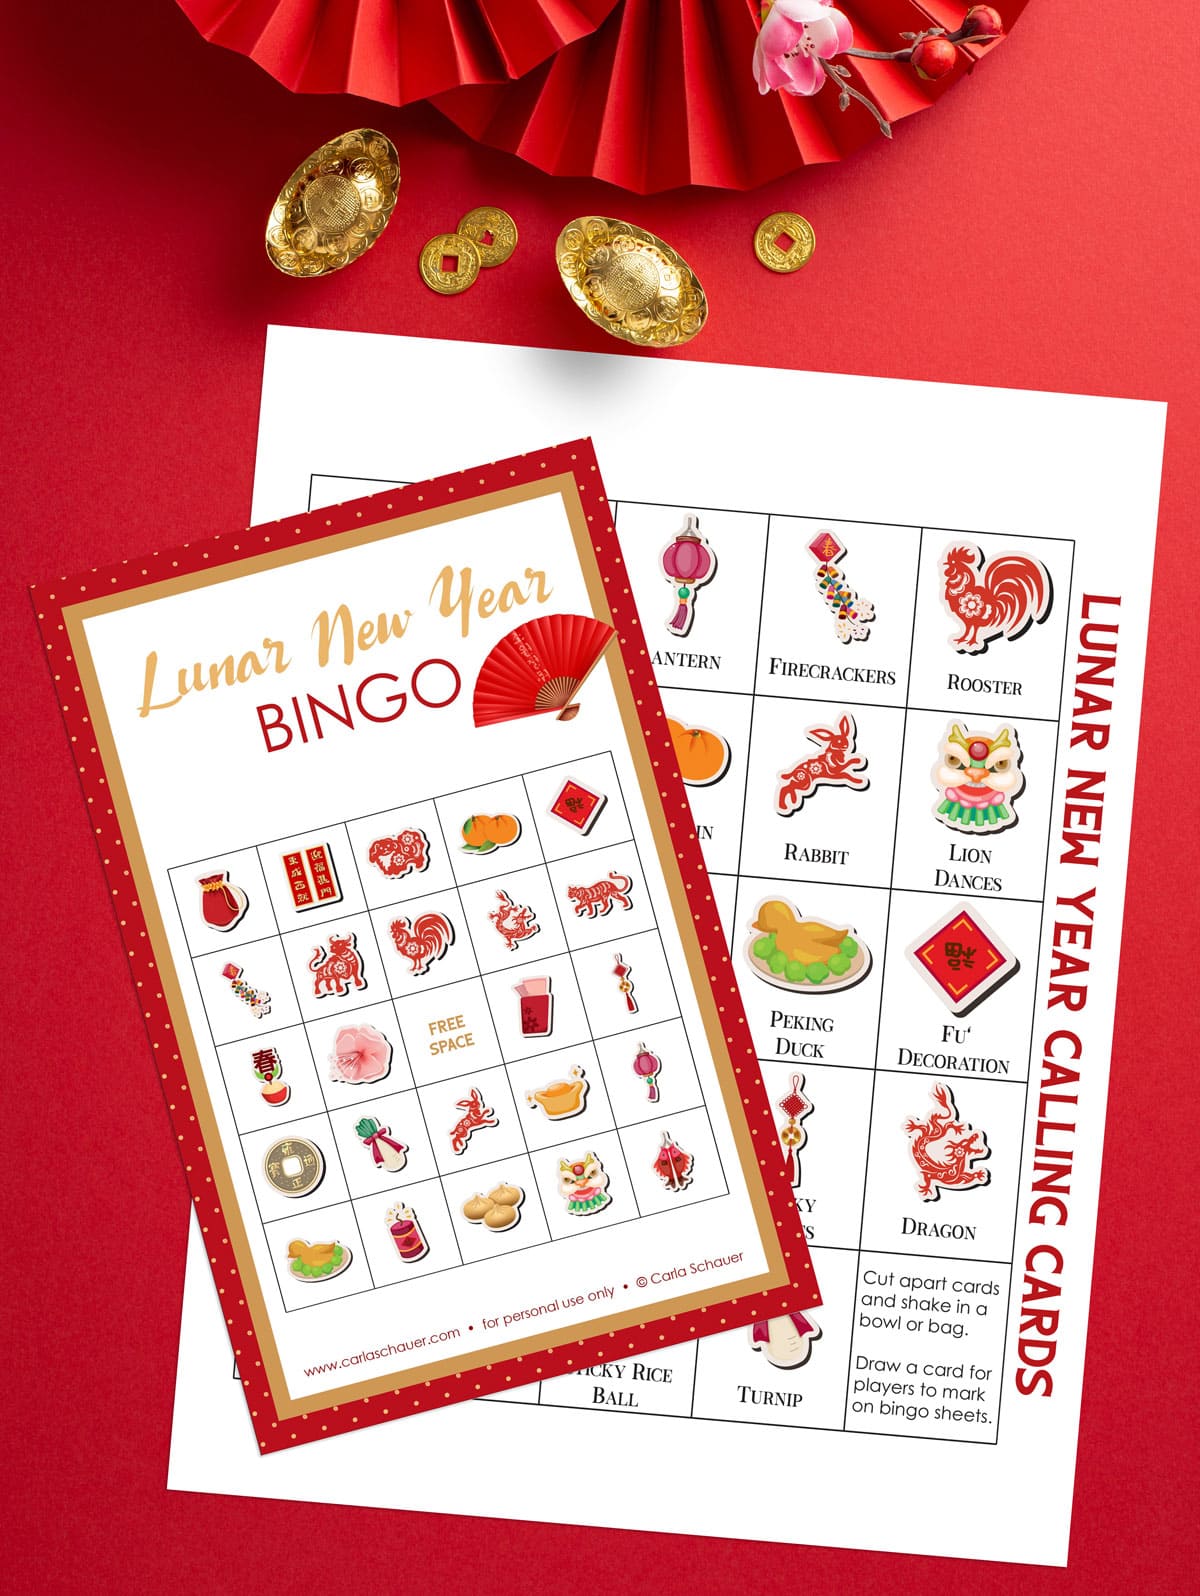 Printed Lunar New Year Bingo Card, white with red border and grid with 25 holiday icons. Card is lying on printed calling card page with same icons. Background is red with gold trinkets and red fans.